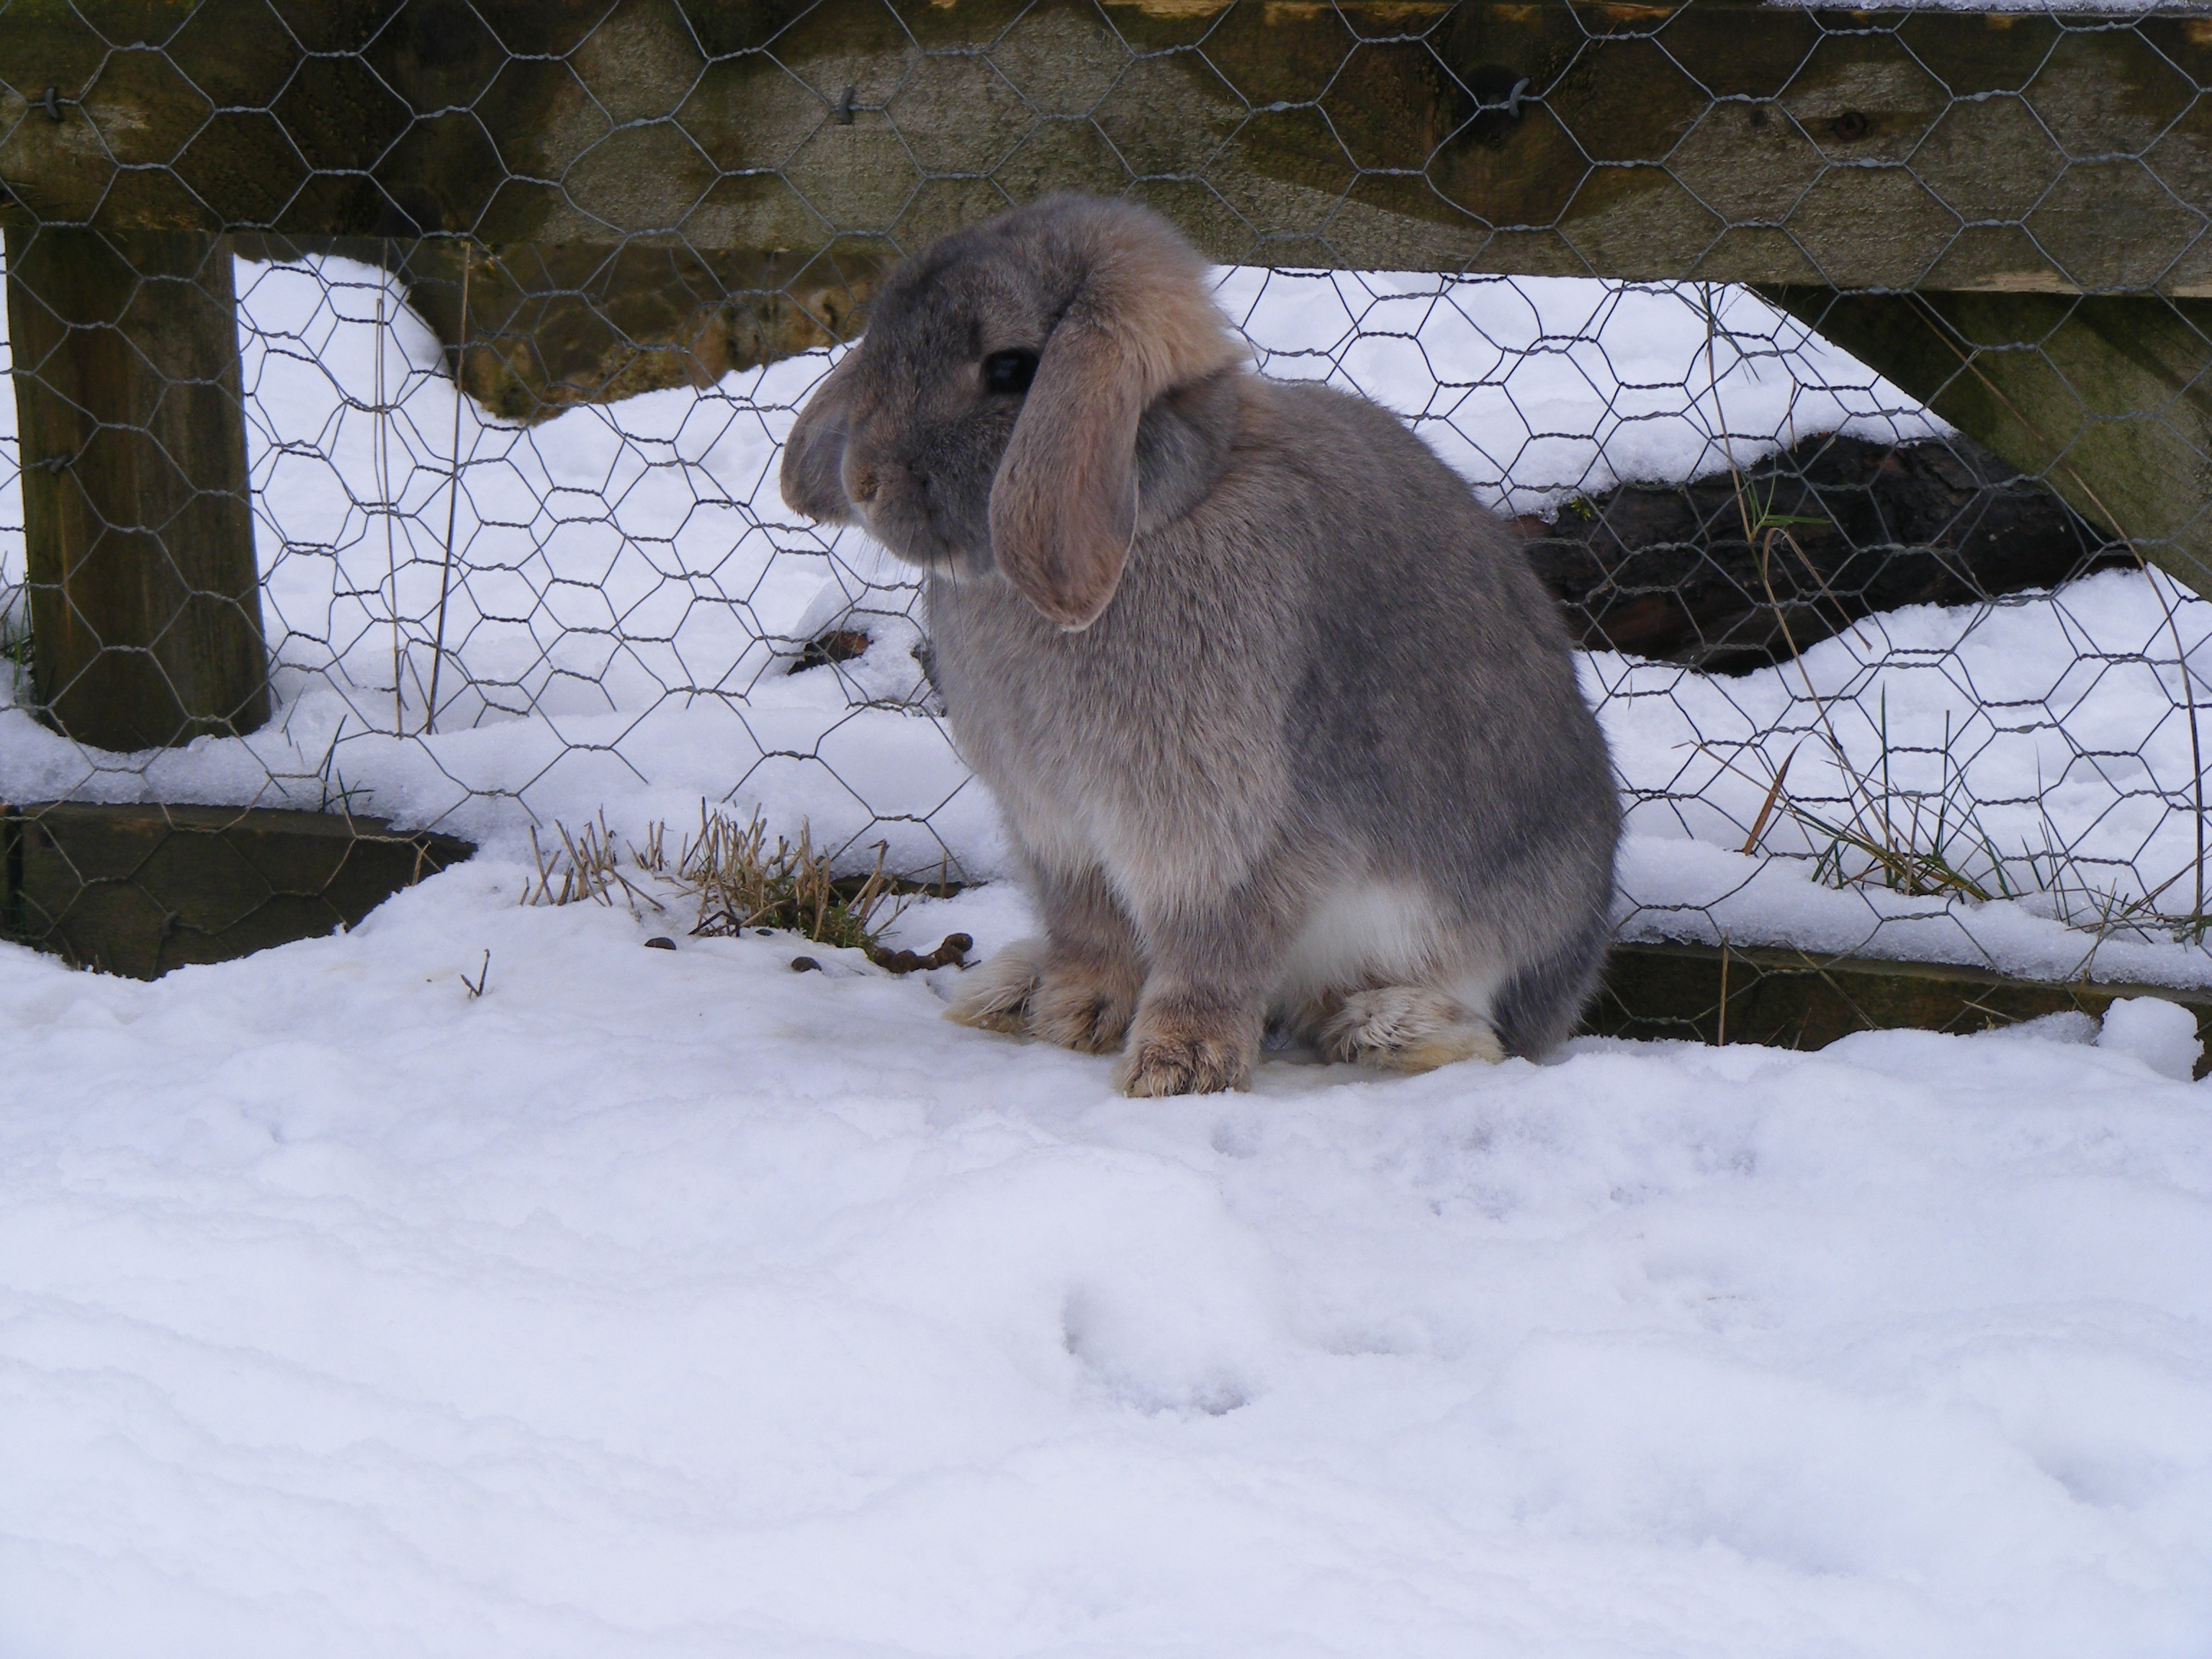 Brentknoll Vets will get your Rabbit ready for Winter